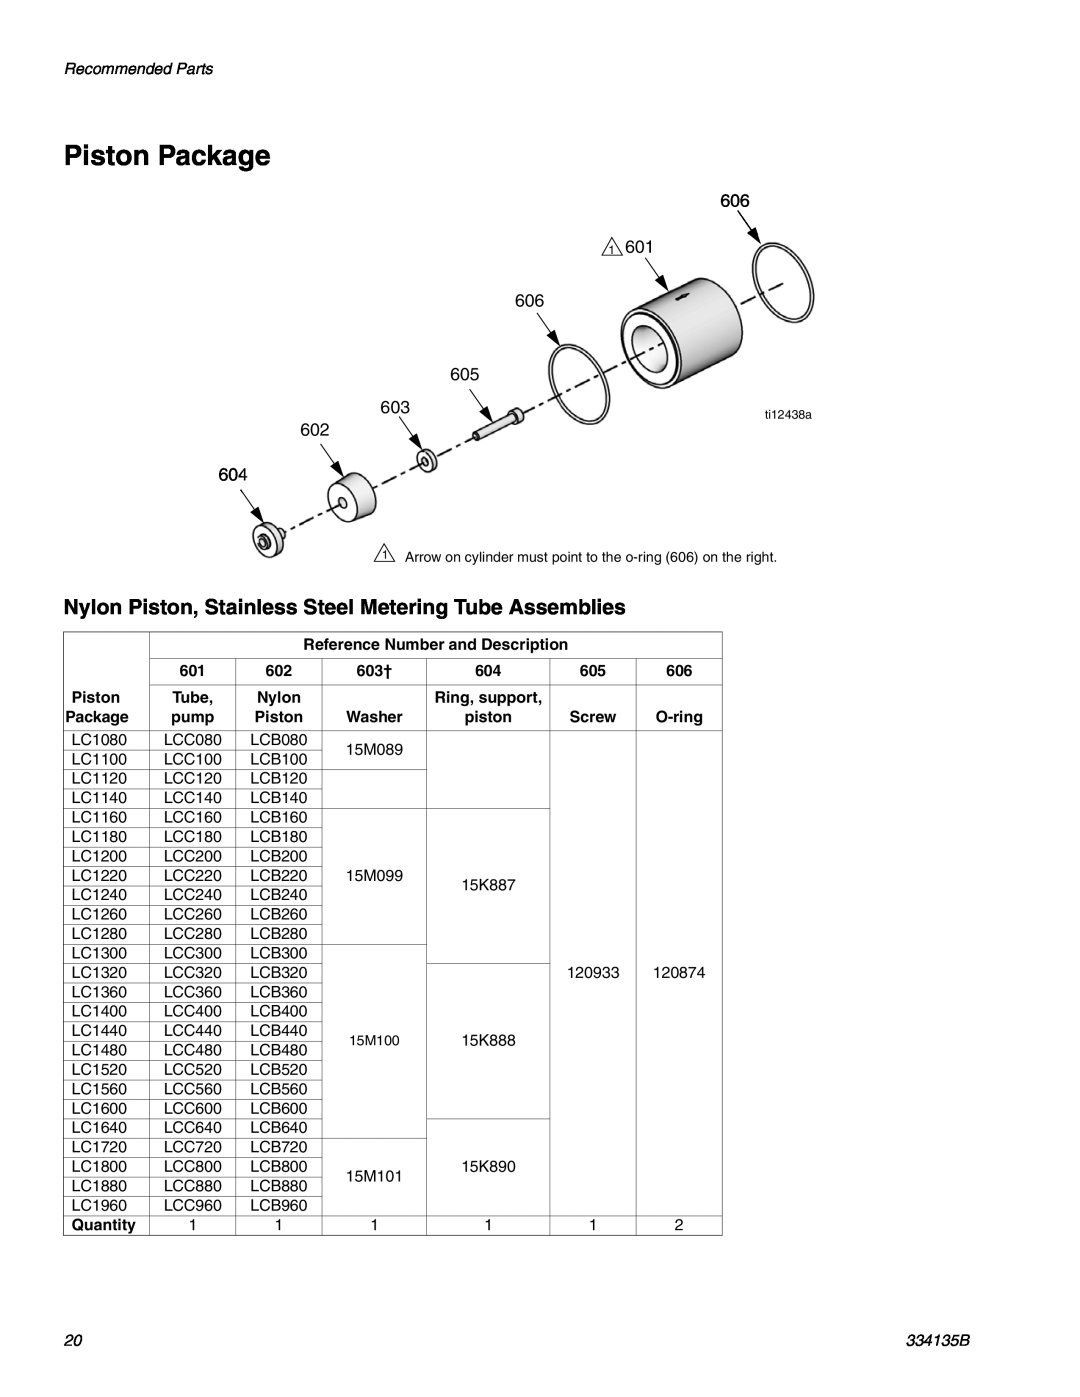 Graco 334135B Piston Package, Nylon Piston, Stainless Steel Metering Tube Assemblies, Recommended Parts 